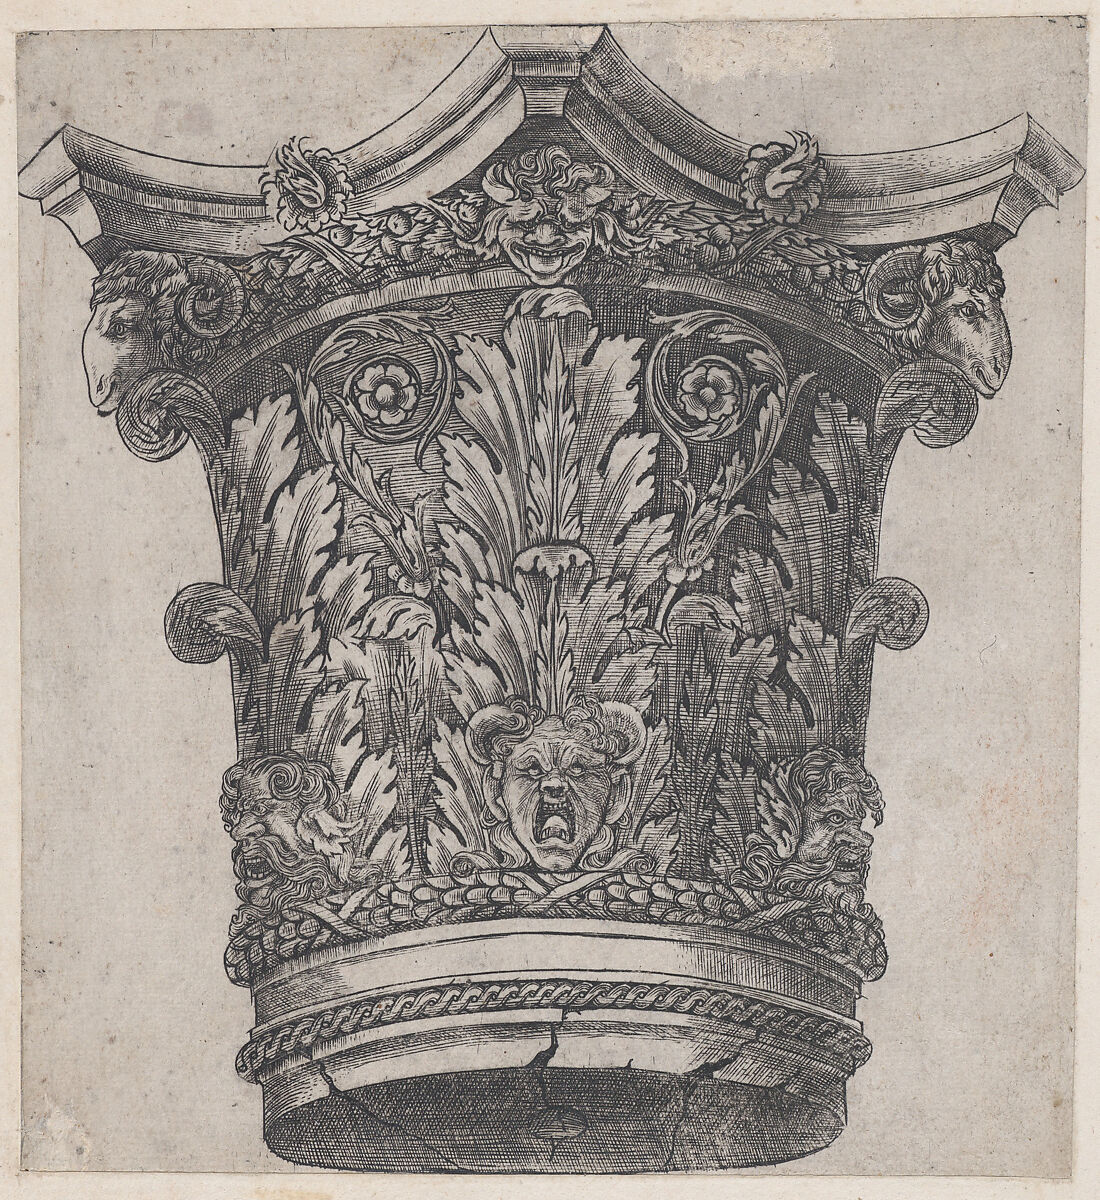 Capital with ram heads and masks, from "Speculum Romanae Magnificentiae", Monogrammist G.A. &amp; the Caltrop (Italian, 1530–1540), Engraving 